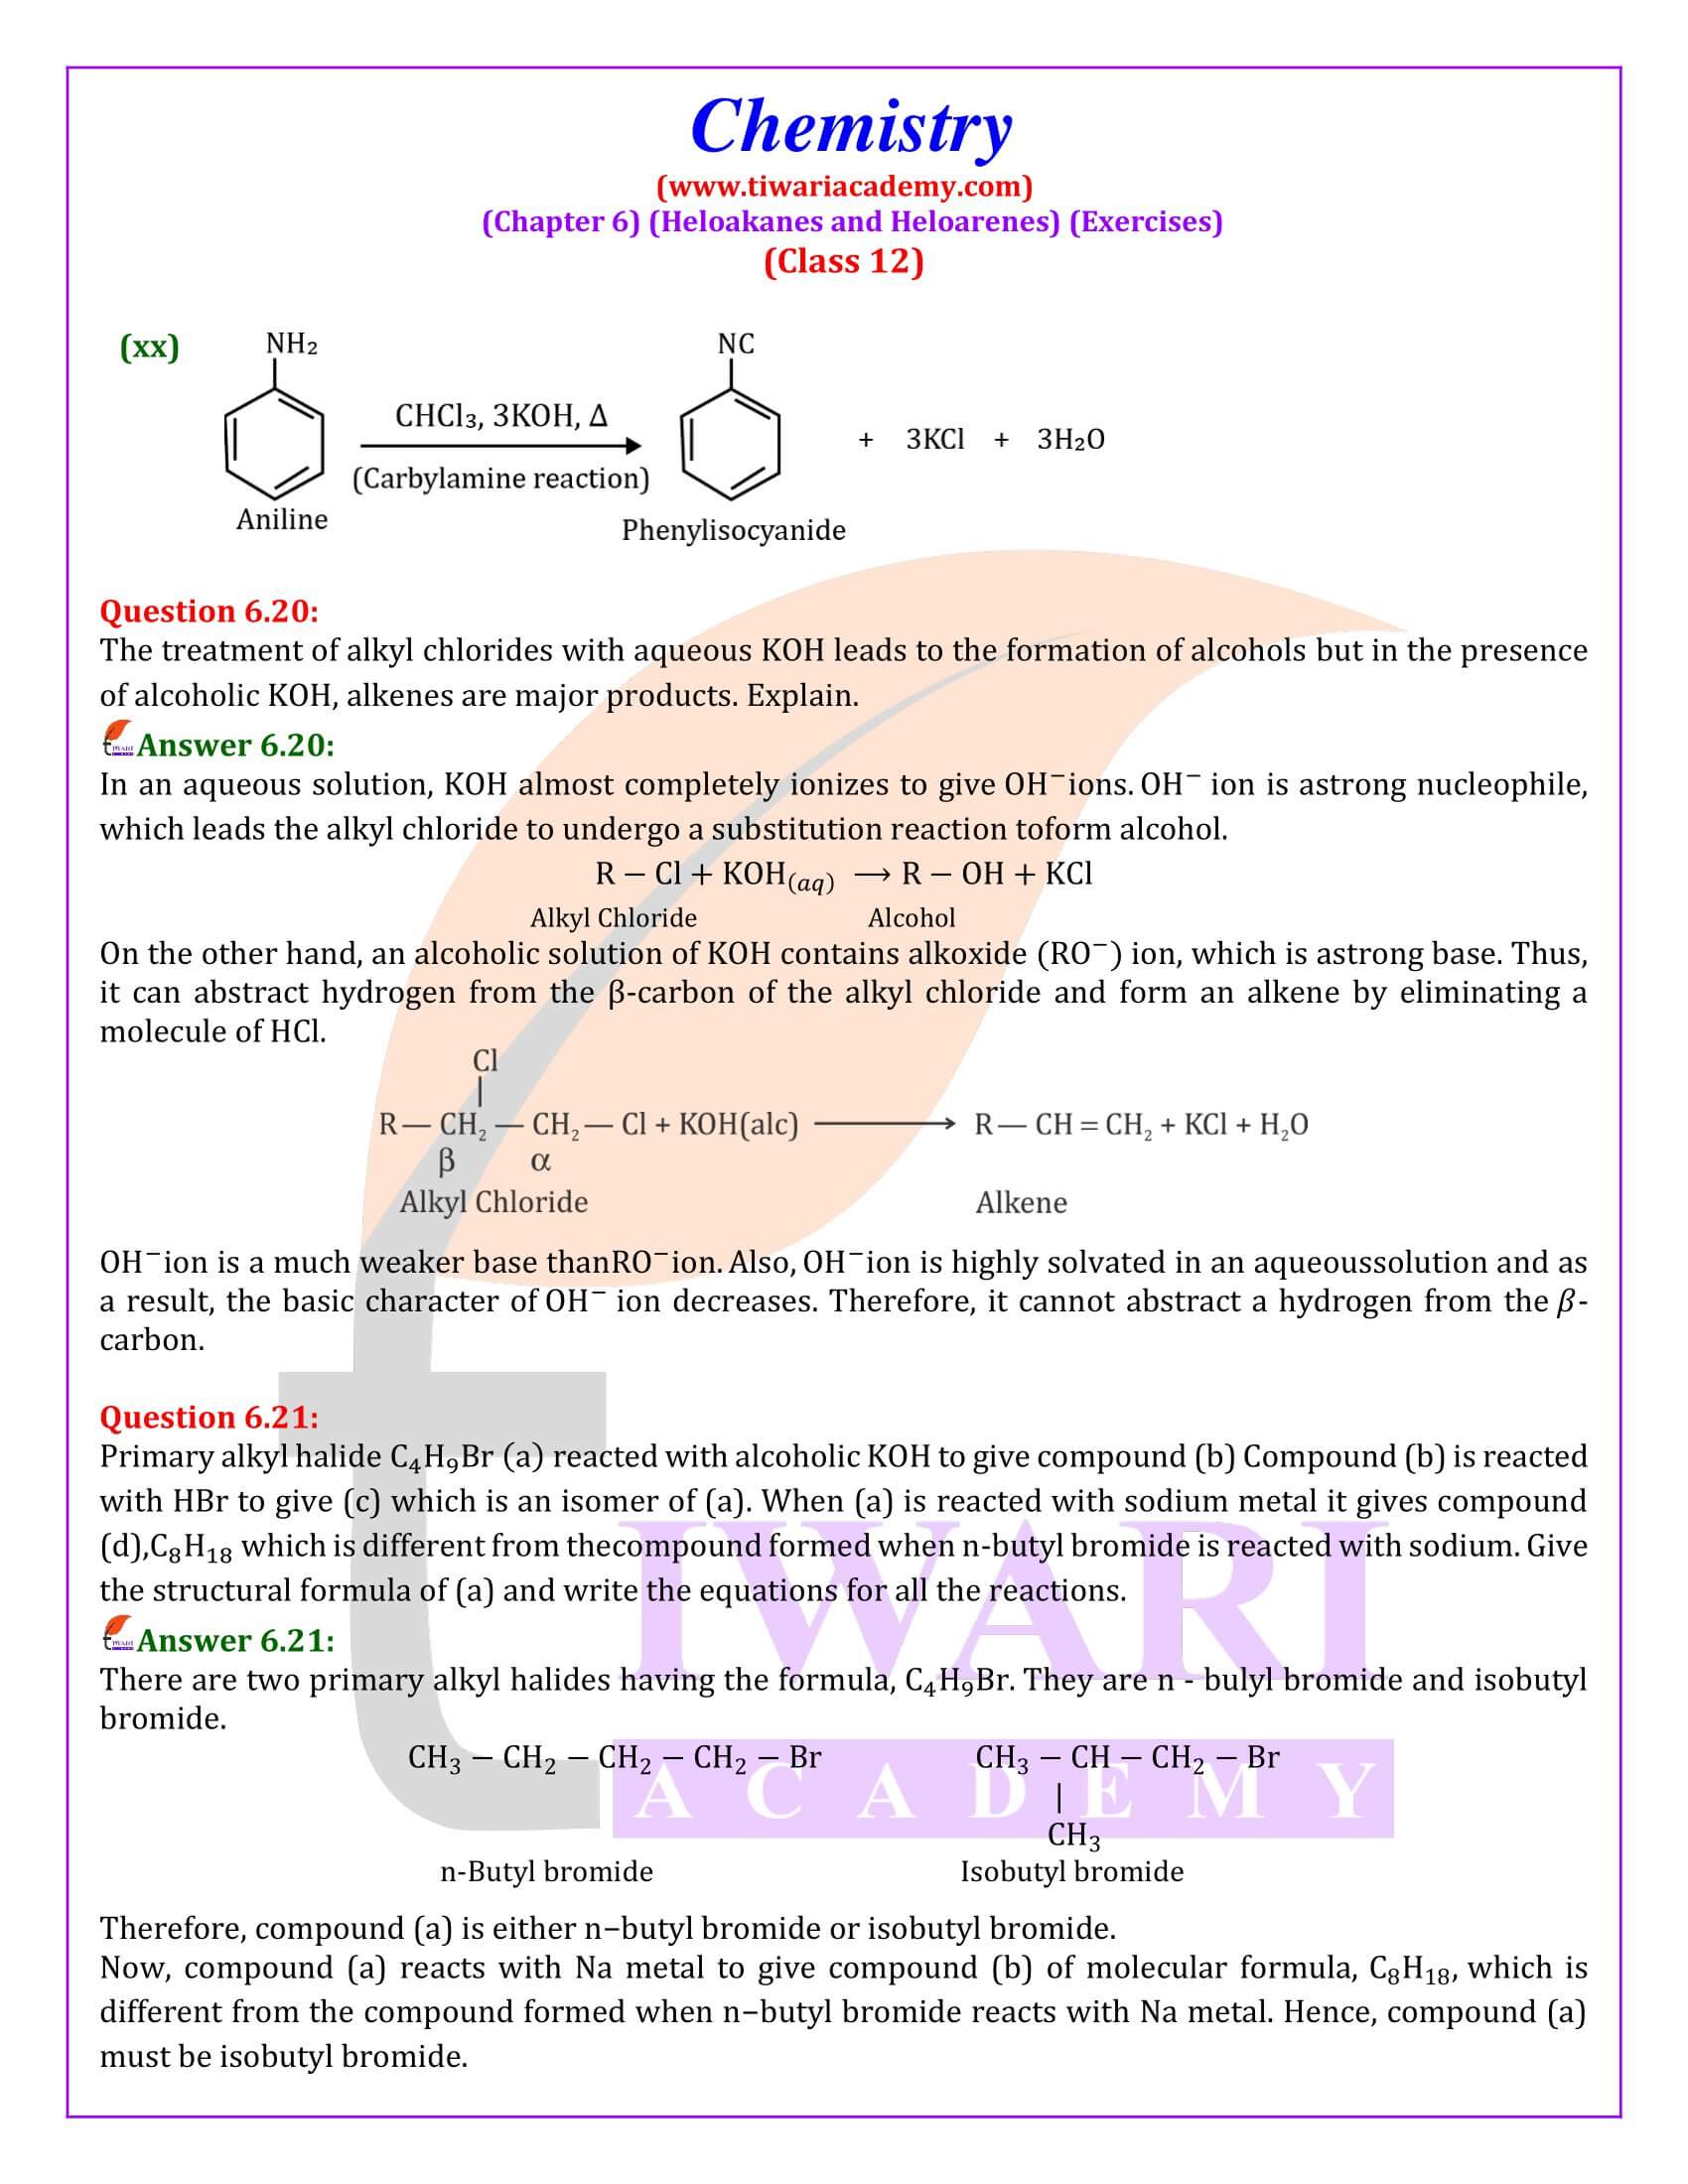 Class 12 Chemistry Chapter 6 all Question Answers